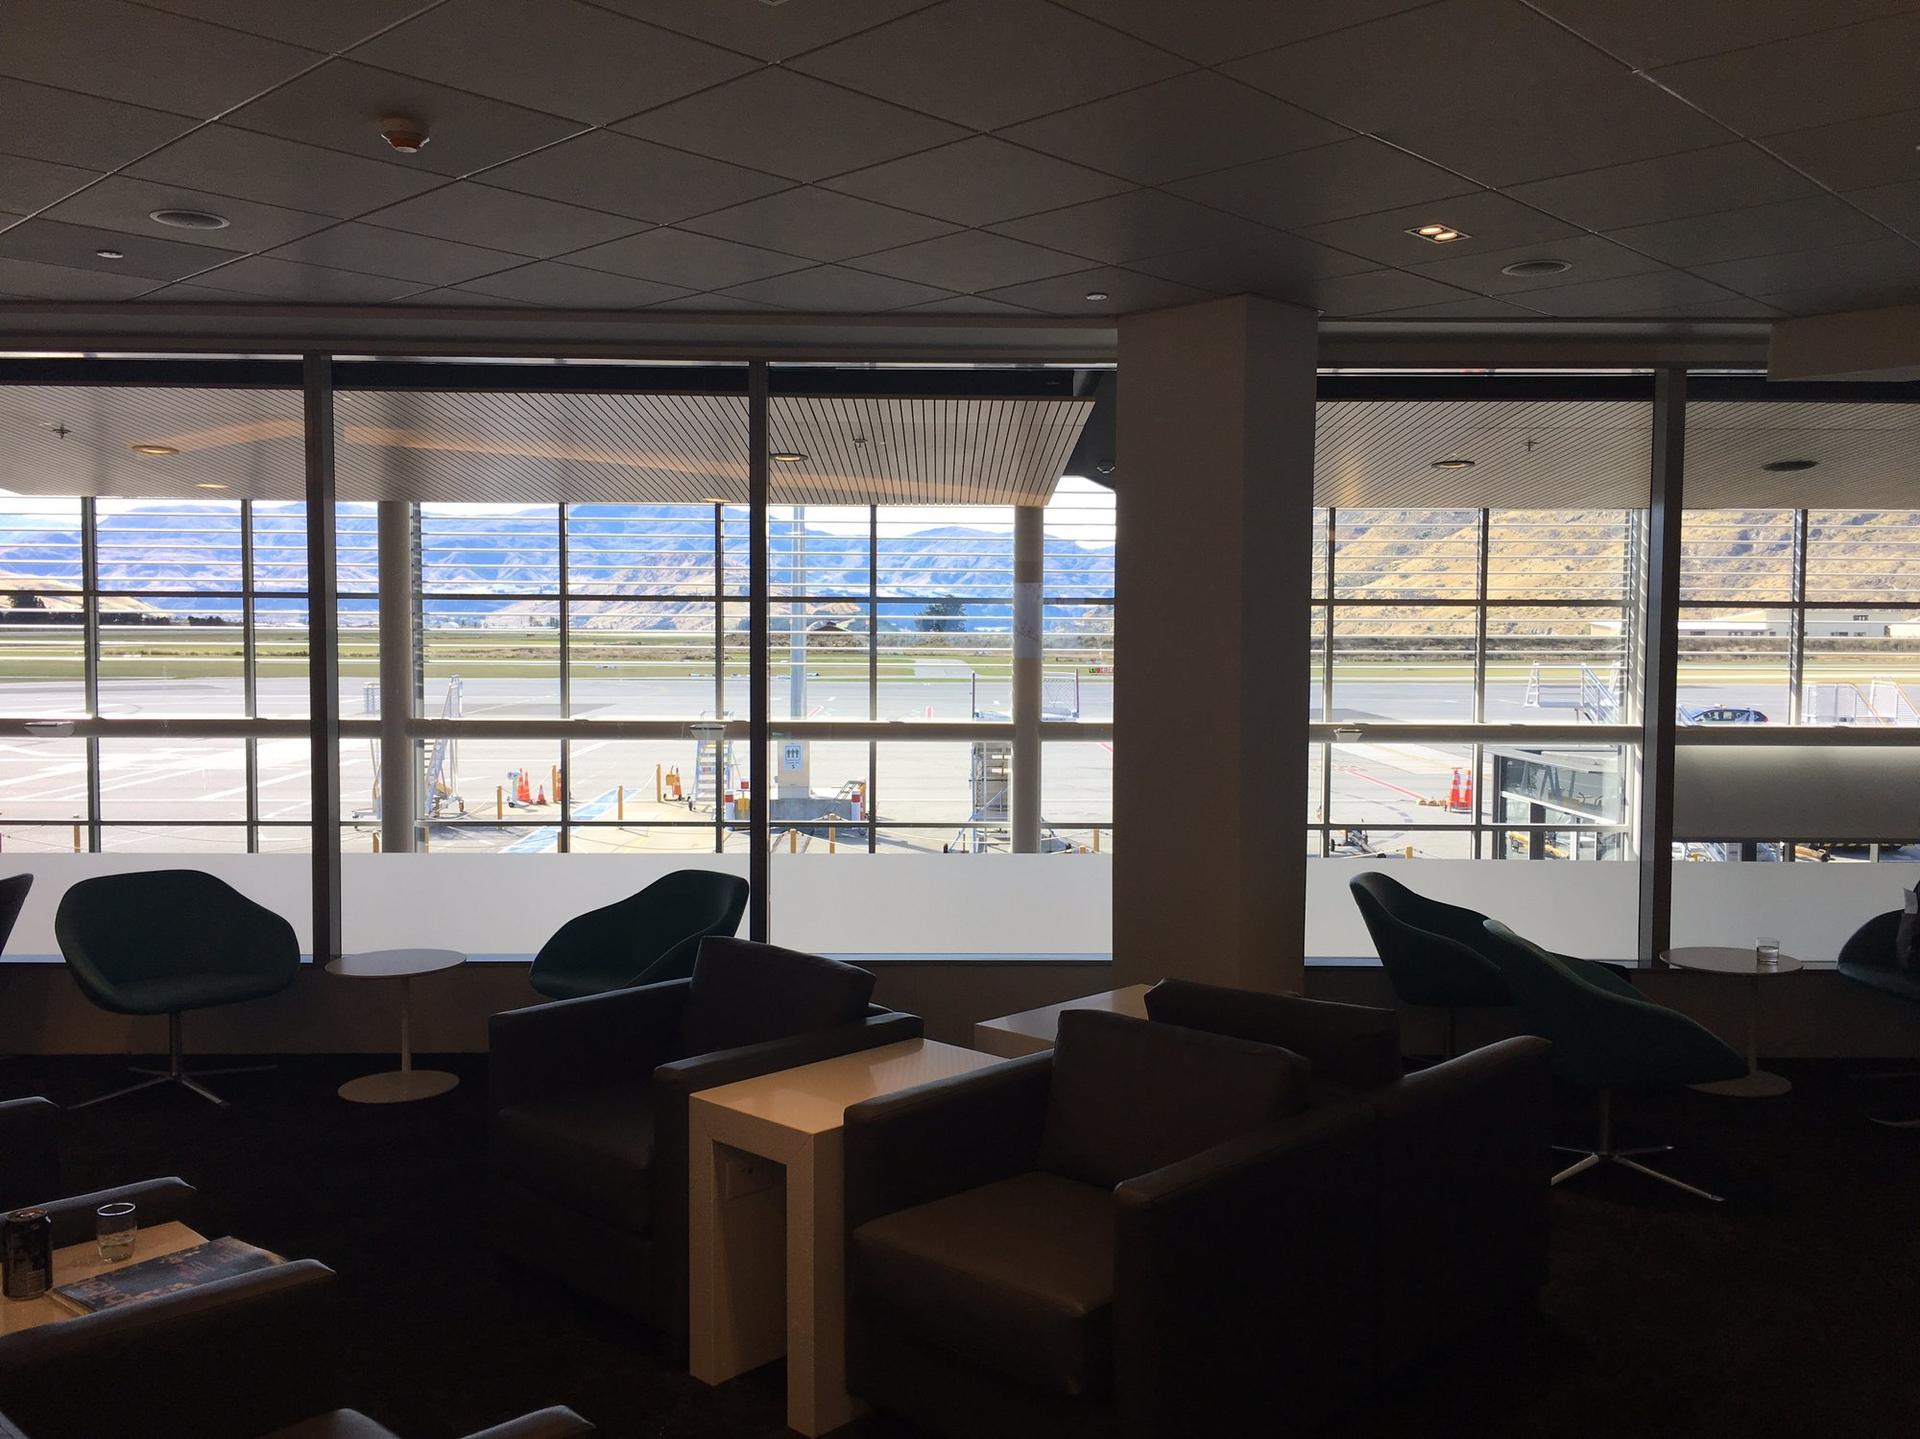 Air New Zealand Regional Lounge image 7 of 7